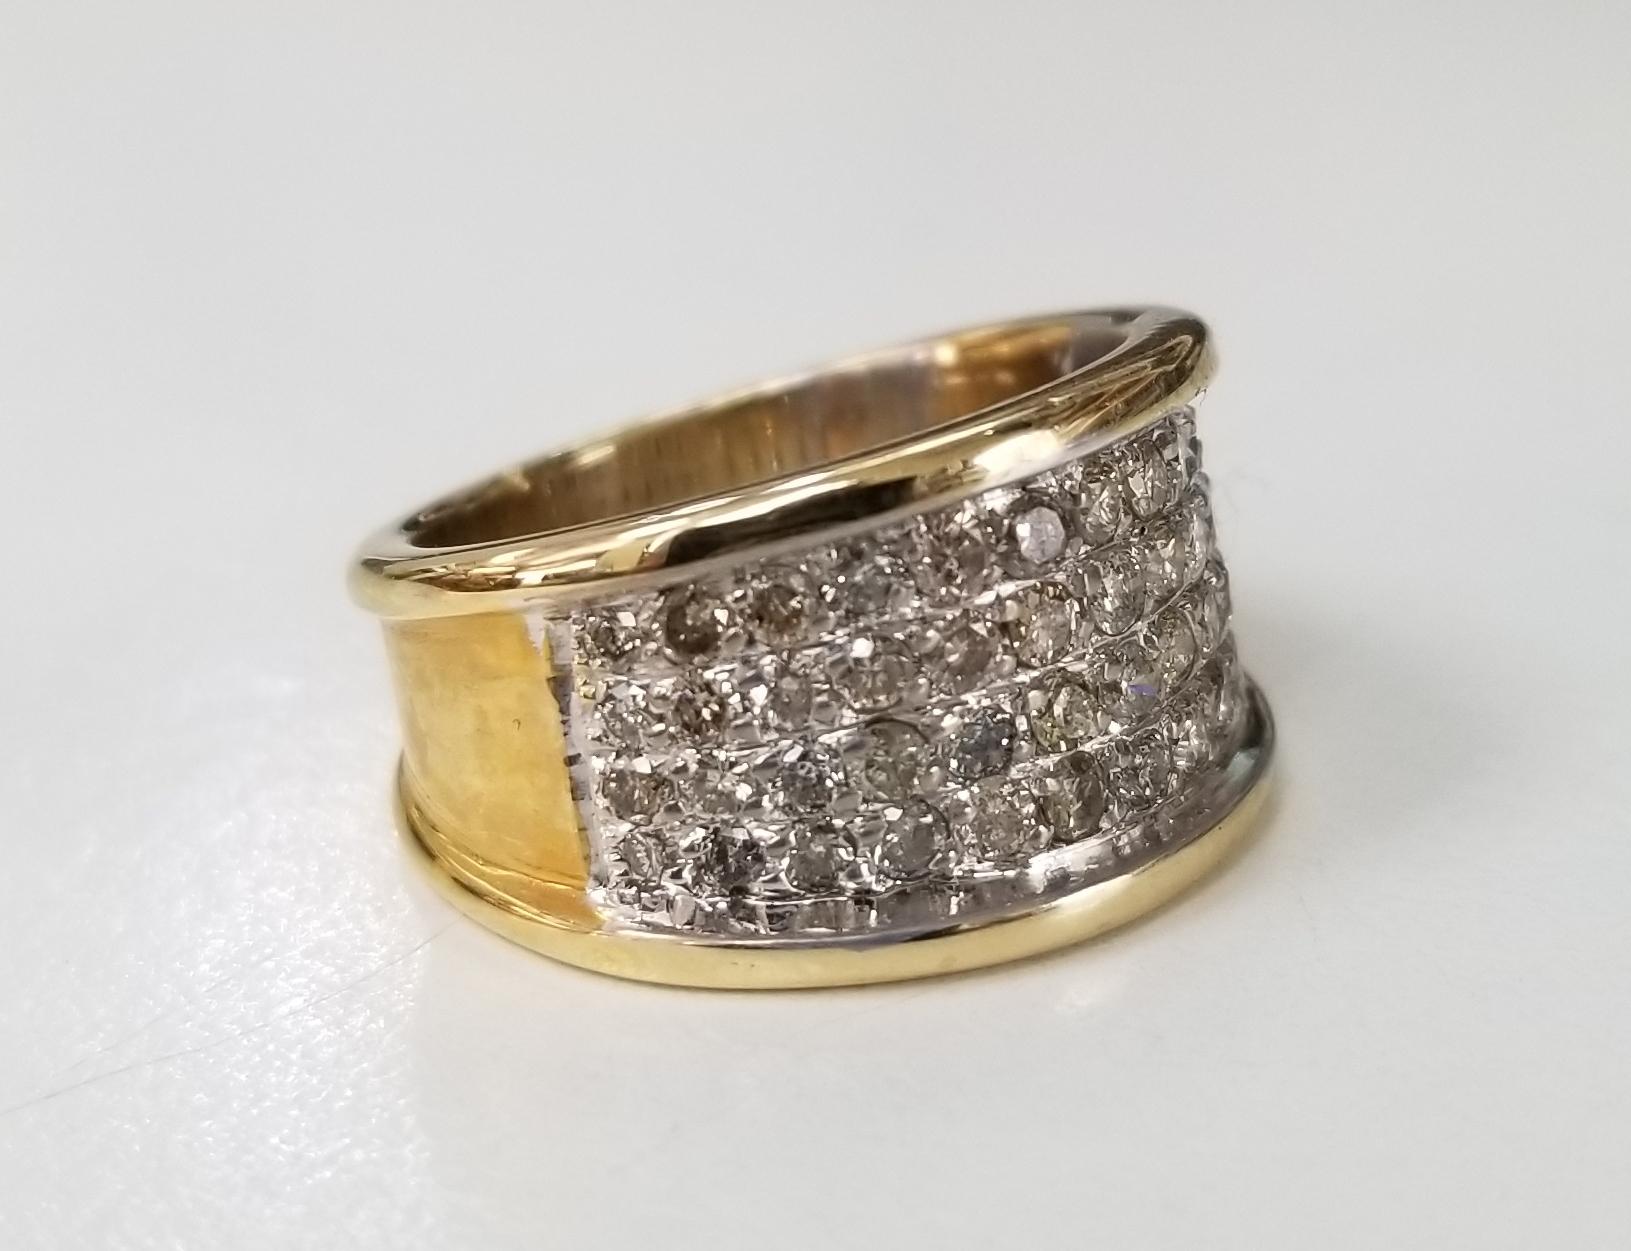 14 karat yellow gold diamond pave' set ring, containing 52 round full cut diamonds  weighing 1.15cts.  This ring is a size 6 but we will size to fit for free.